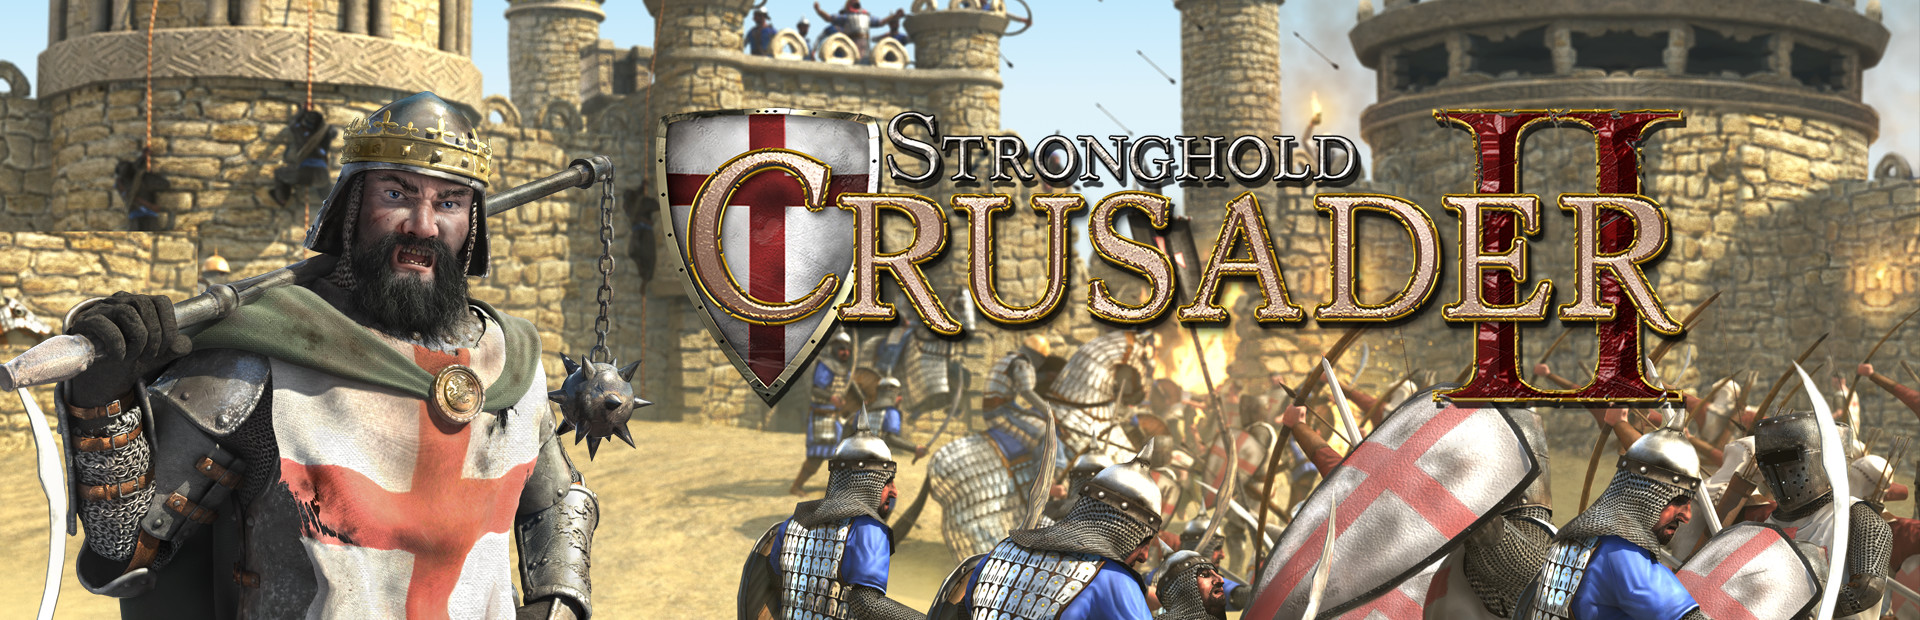 Stronghold Crusader 2 cover image